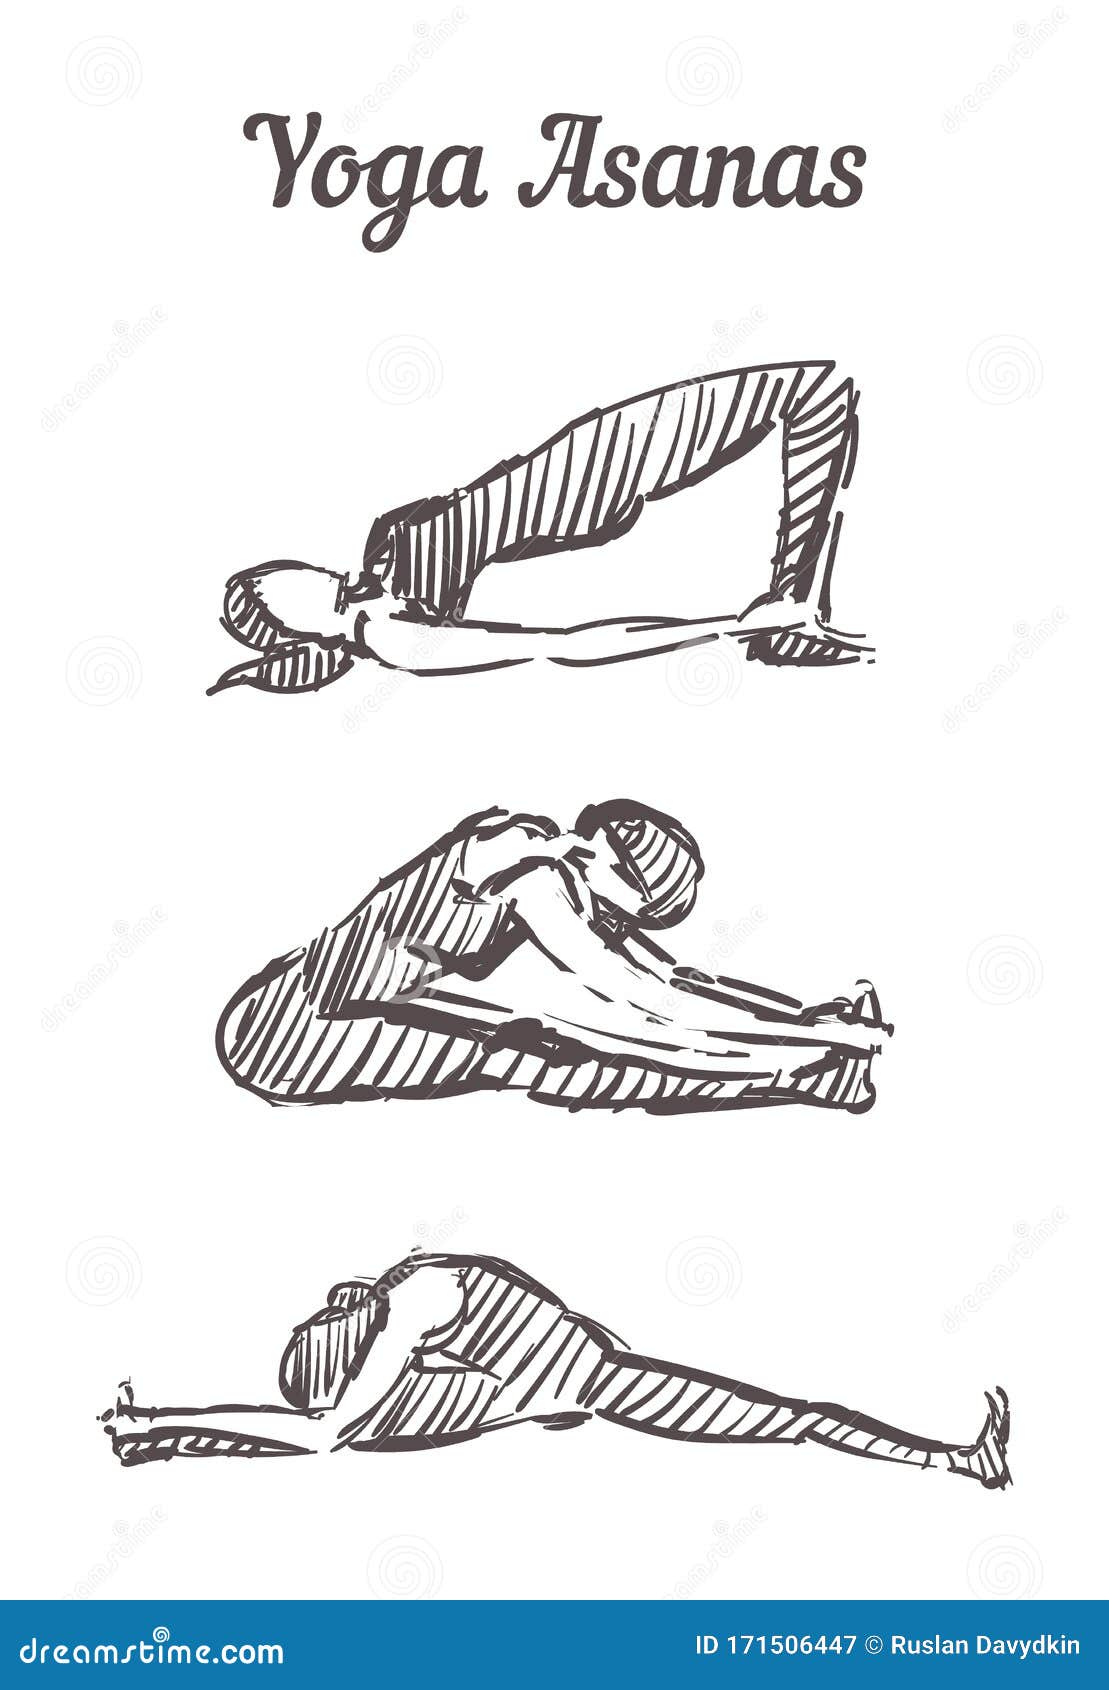 5 yoga postures drawing​ - Brainly.in